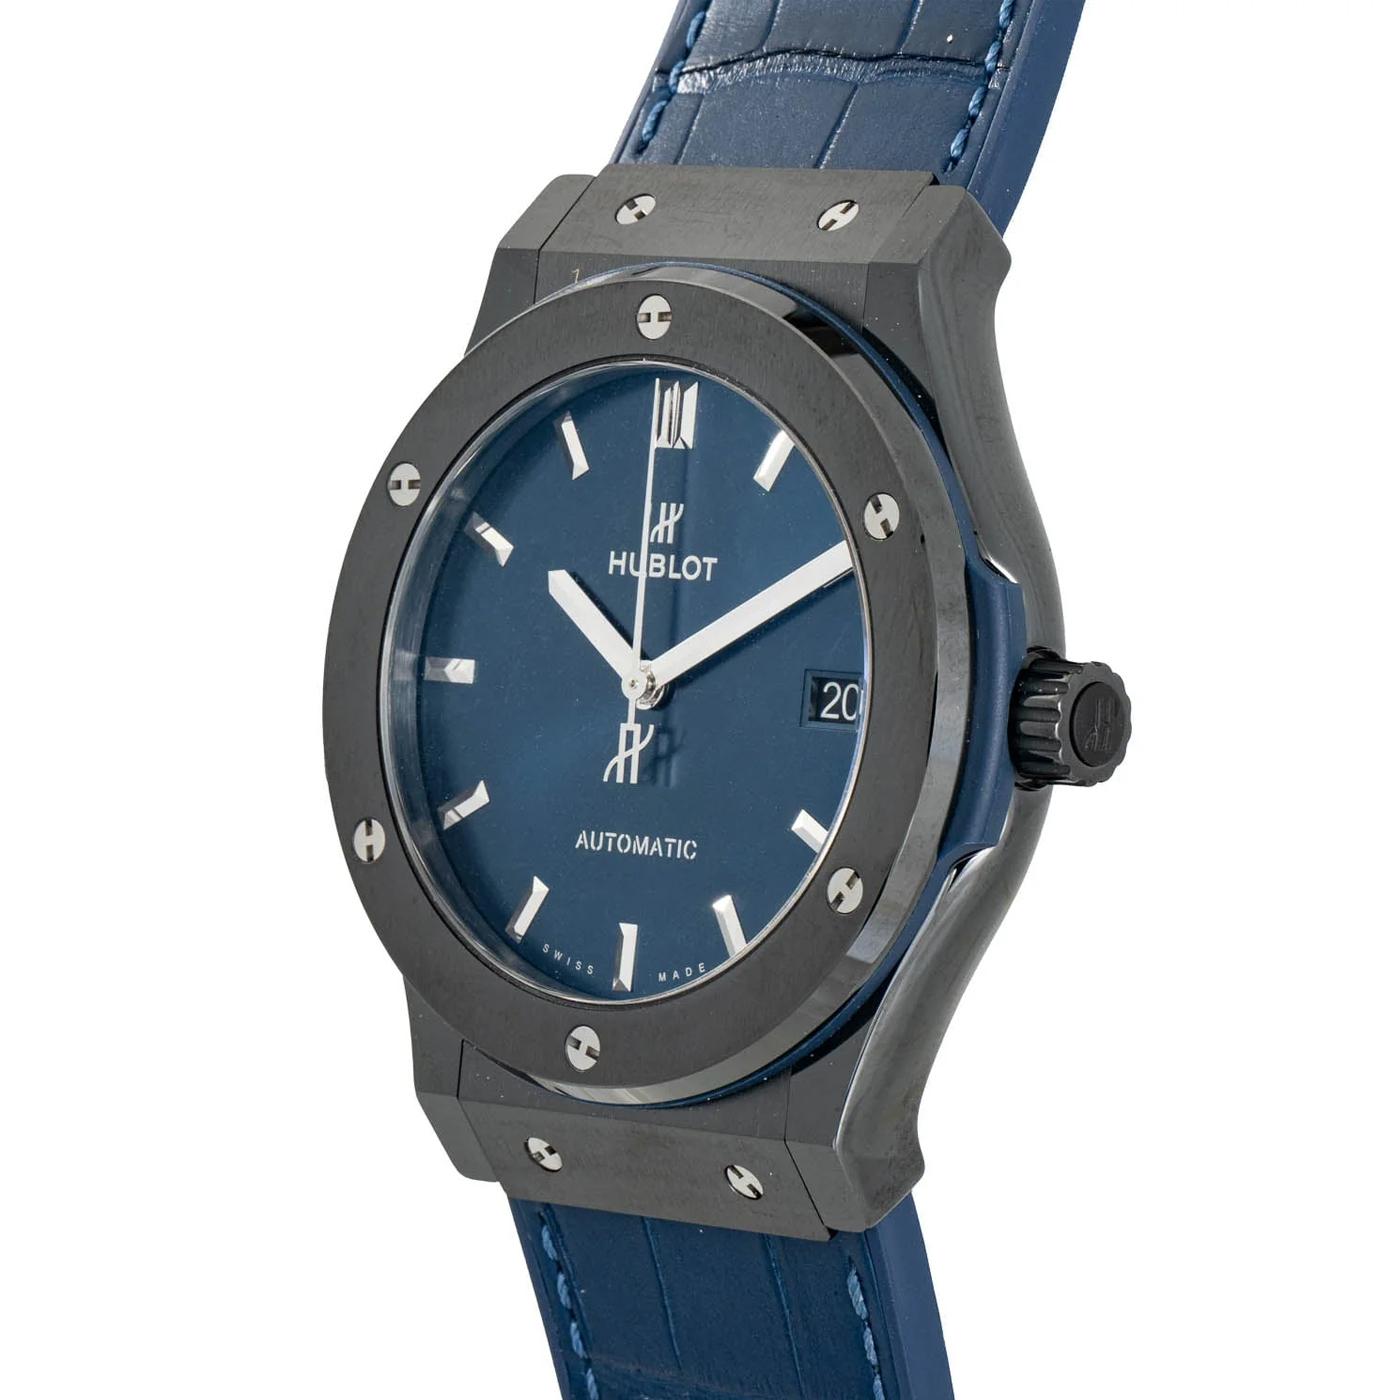 Hublot Classic Fusion Black Ceramic Blue Watch 45mm 511.CM.7170.LR. A new addition to the classic fusion range this blue dial model features a satin and polished finished black ceramic bezel. The dial features a satin-finished blue sunray pattern.